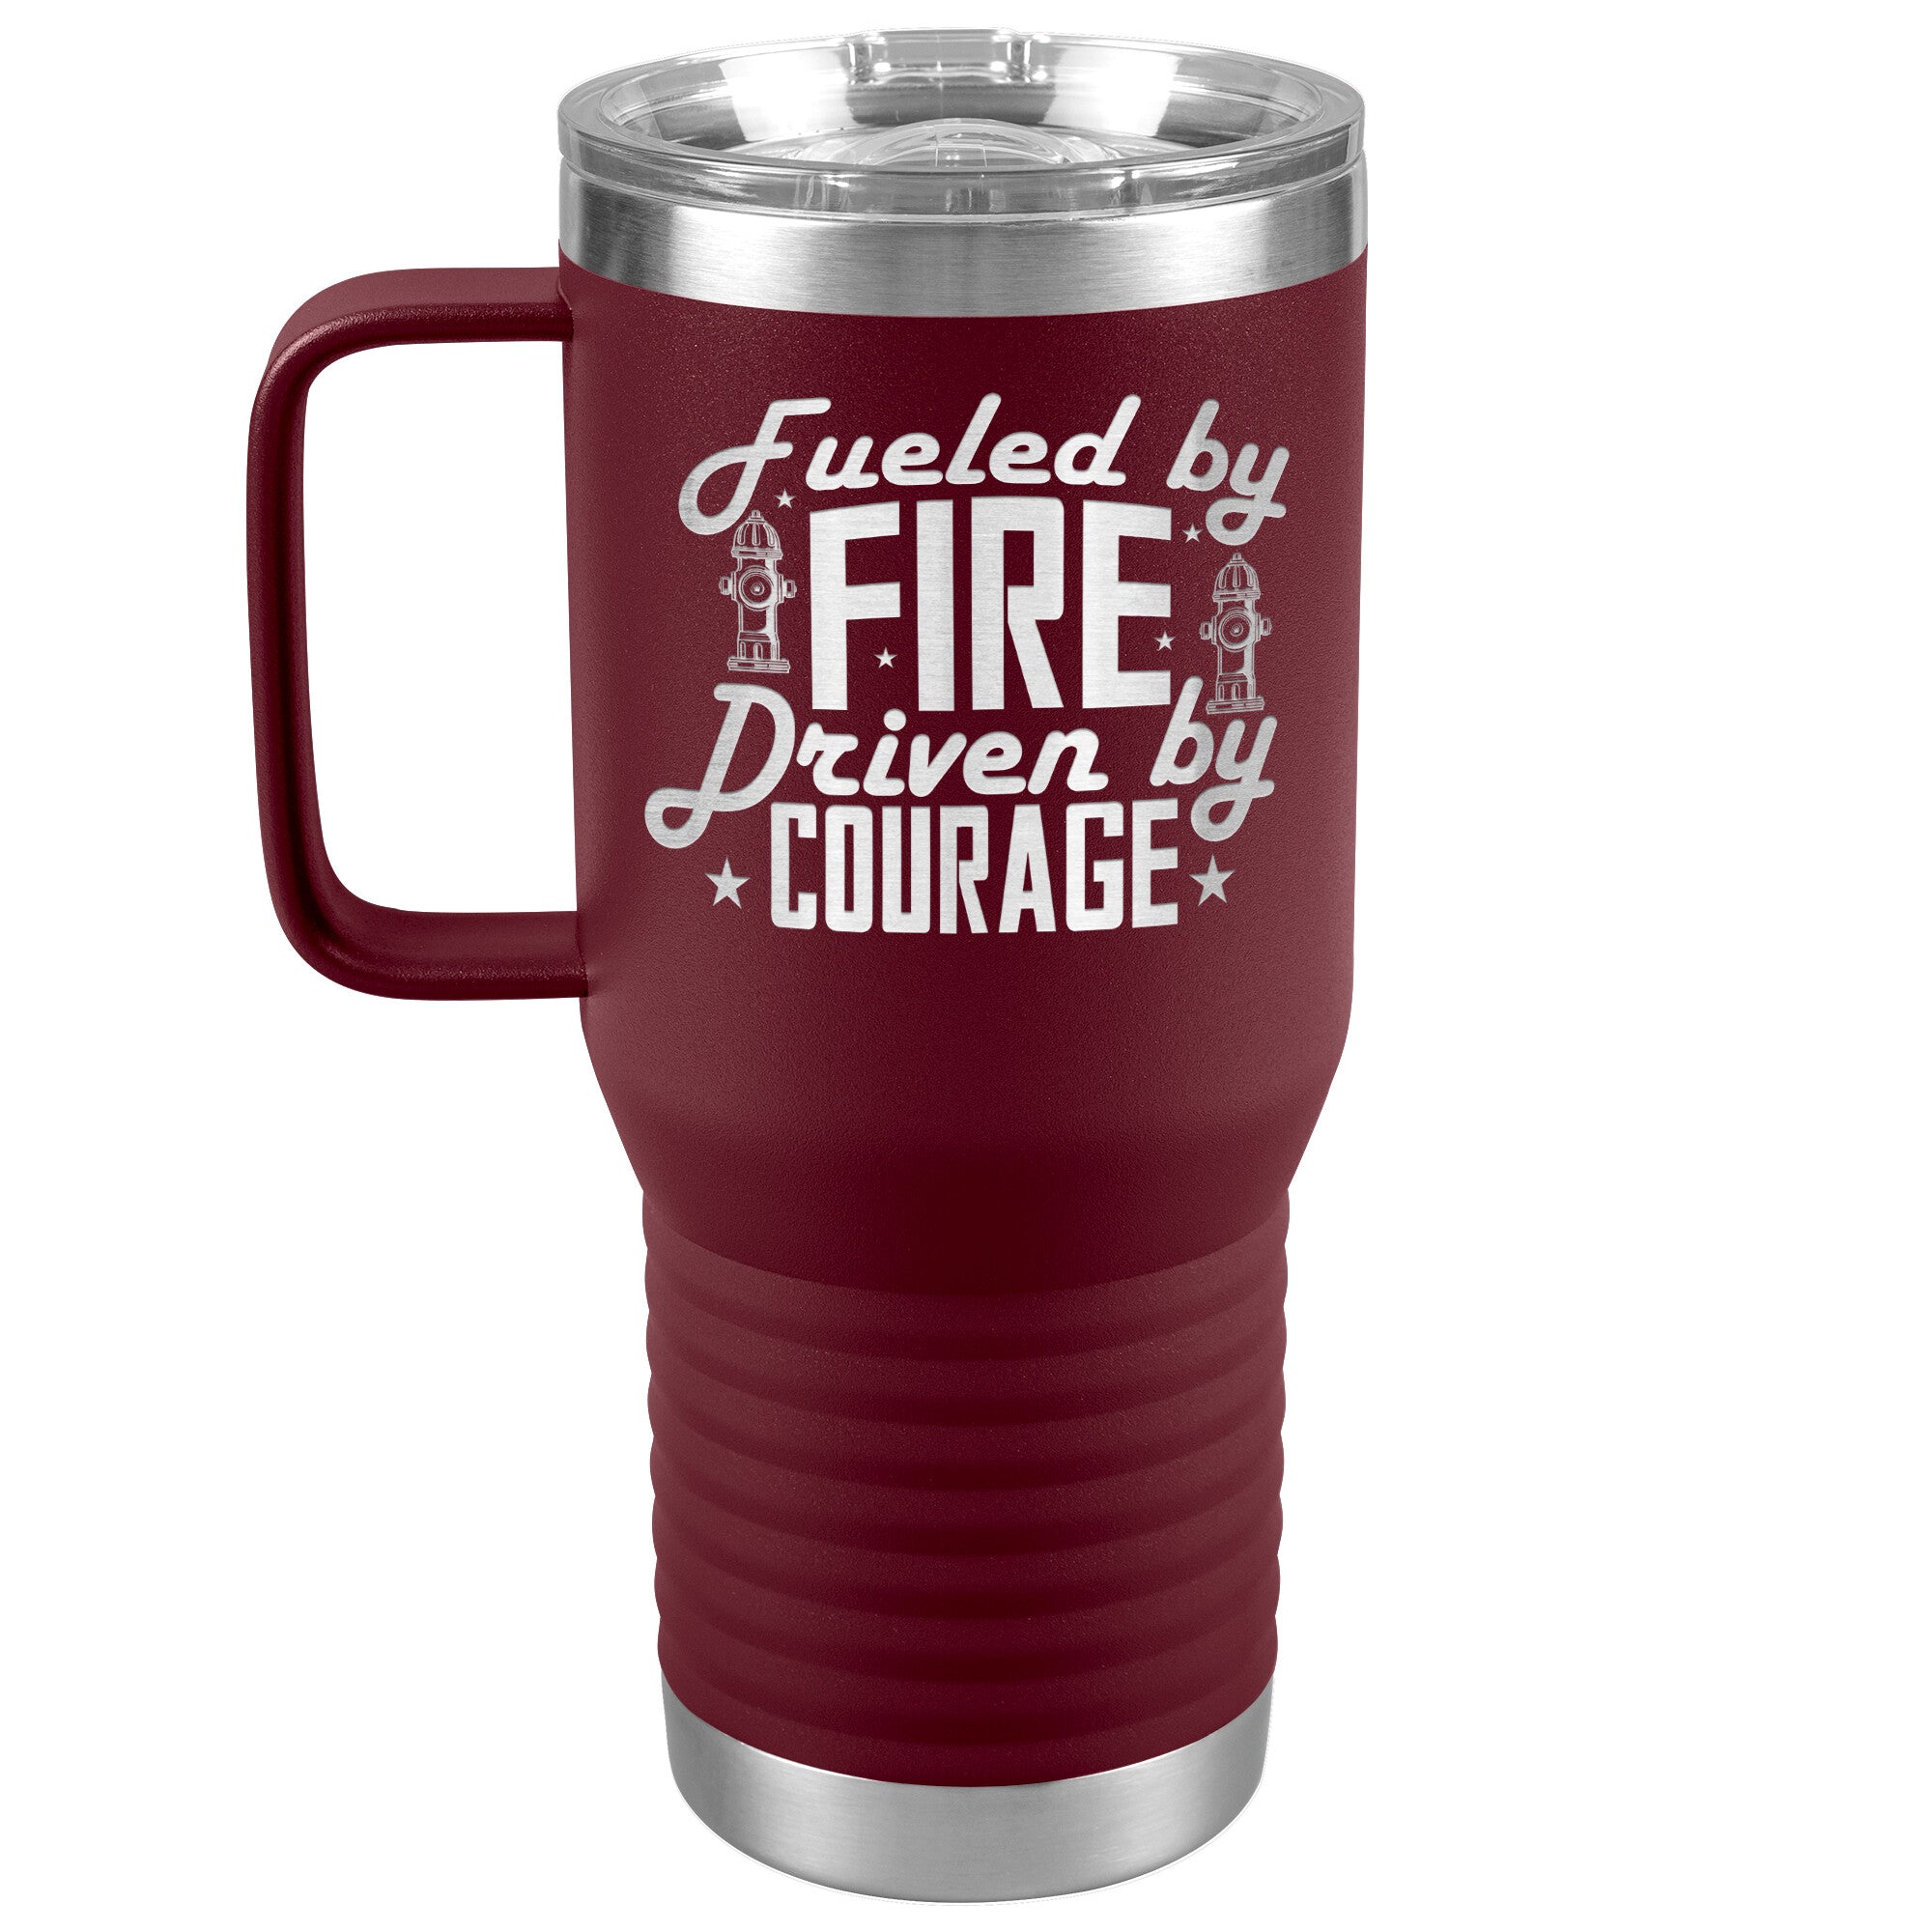 Fueled by FIRE, driven by COURAGE